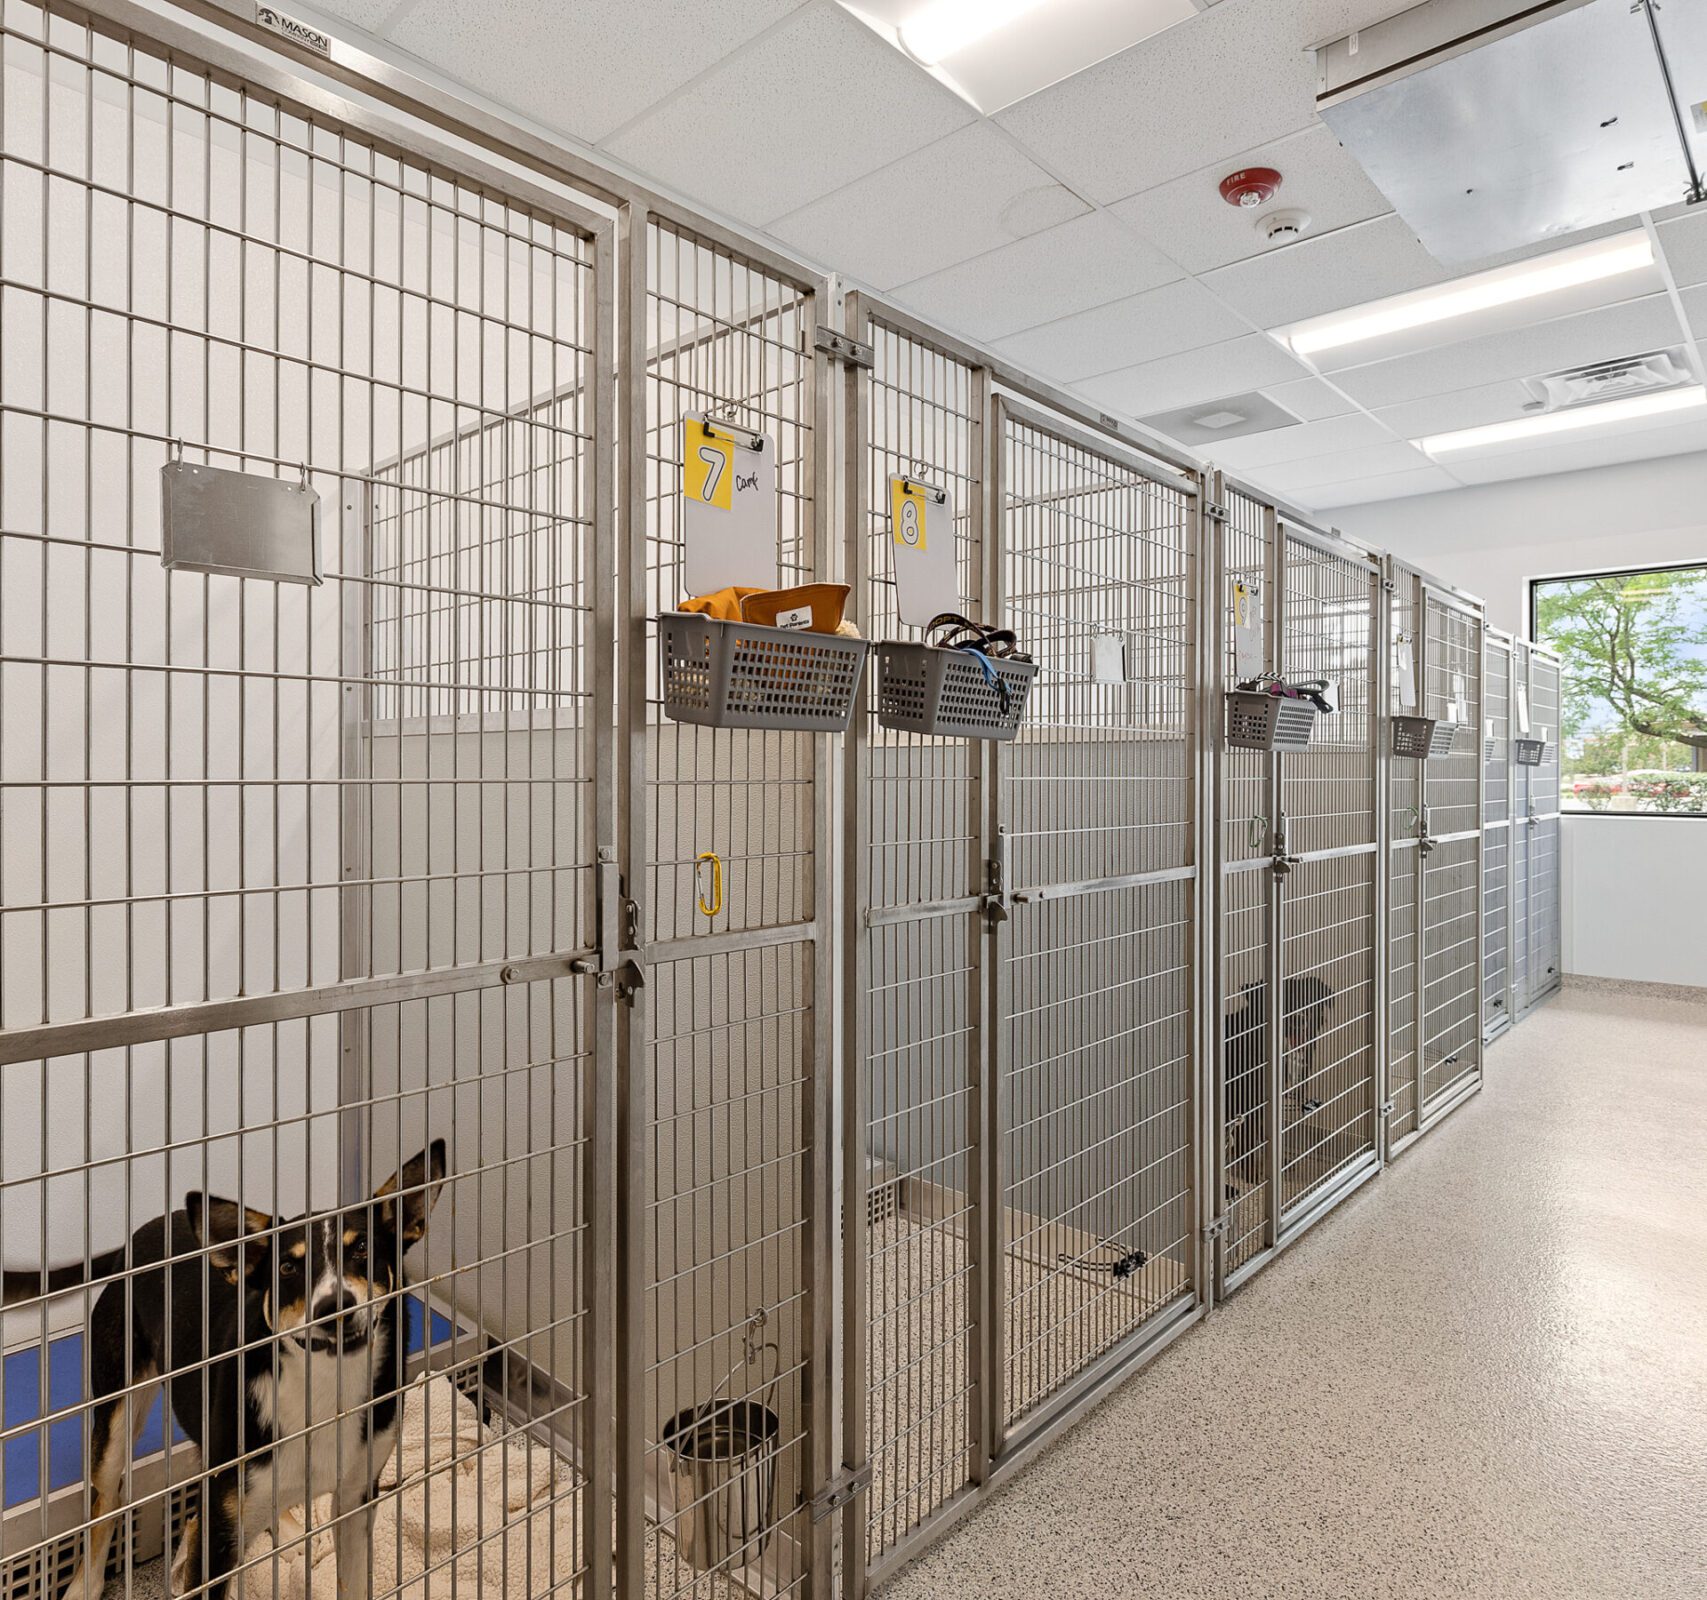 Kennel run with dog image.